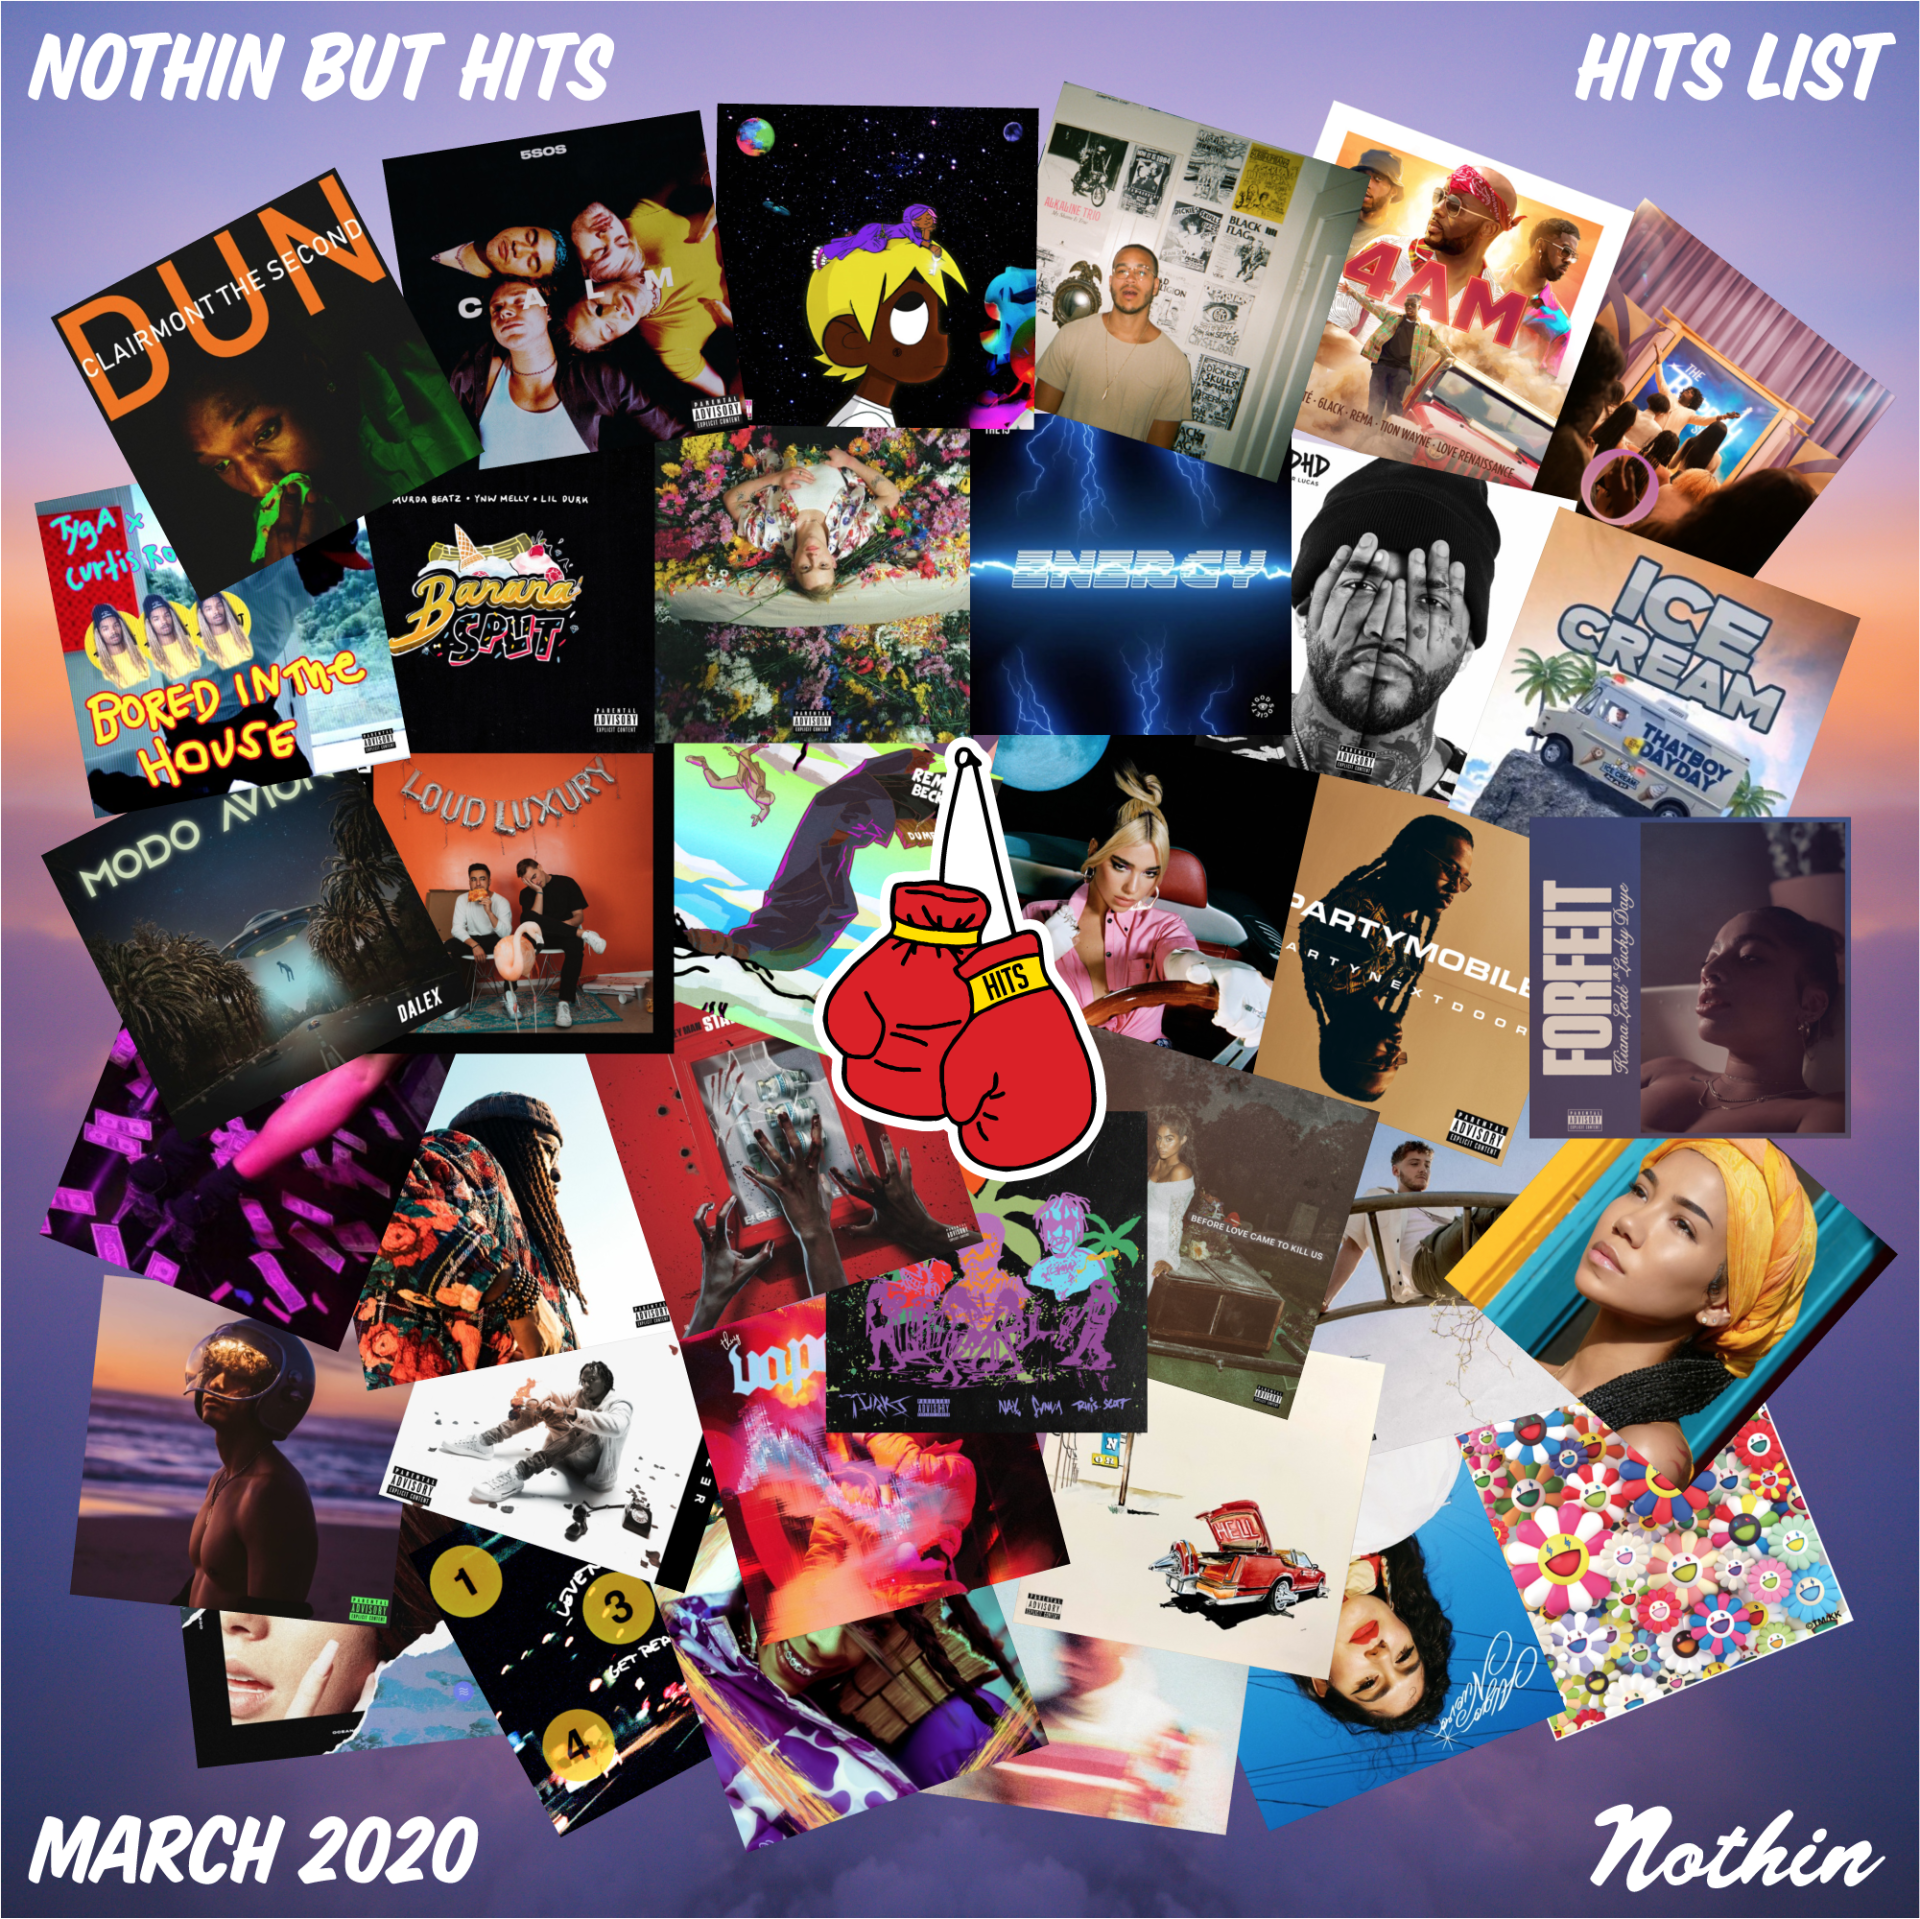 Hits List: March 2020